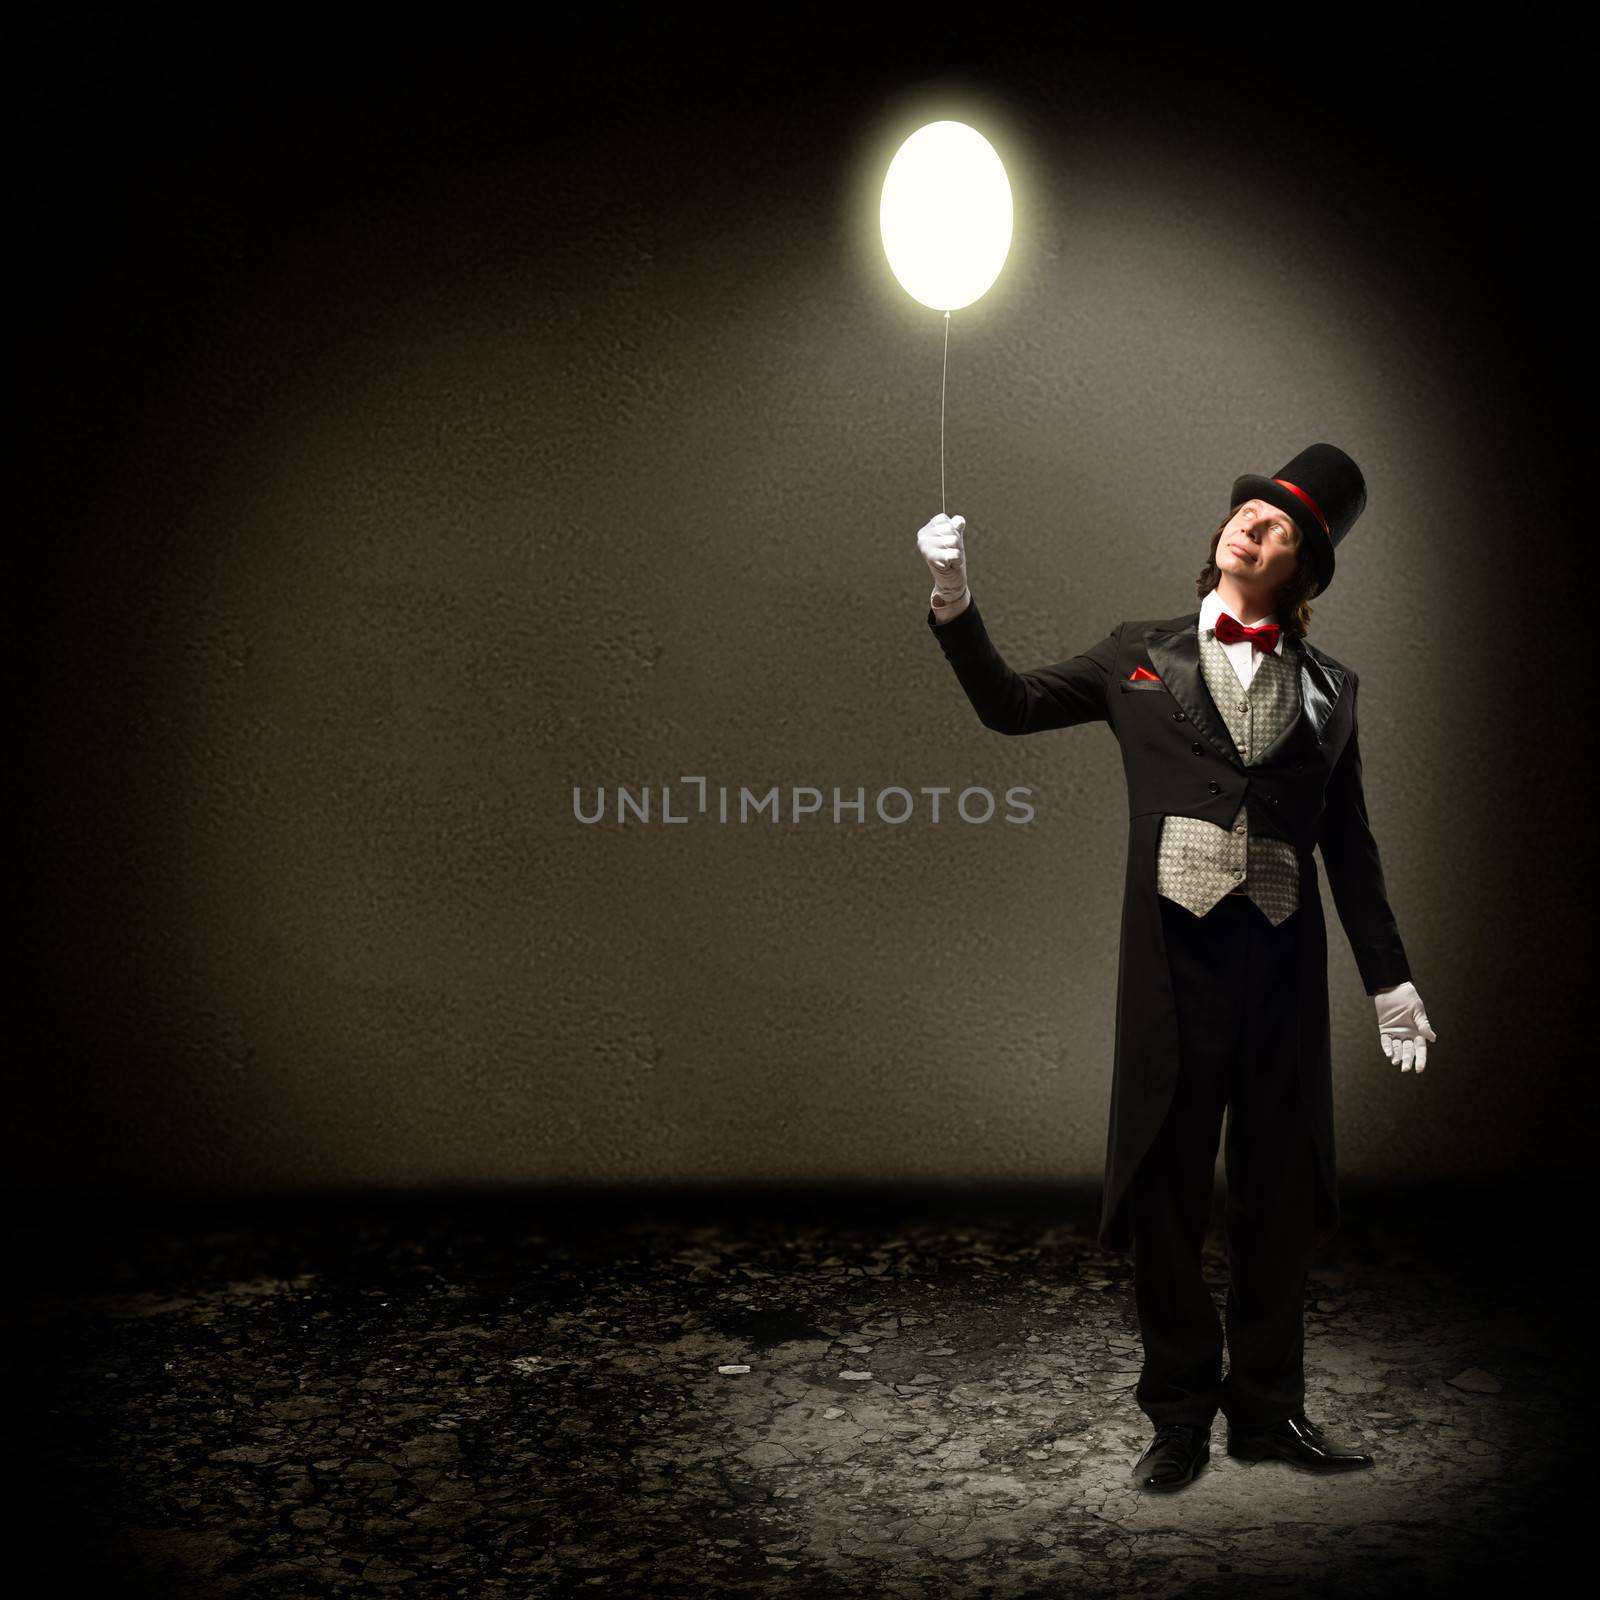 magician in top hat and tie, holding a glowing baloon, and staring at him